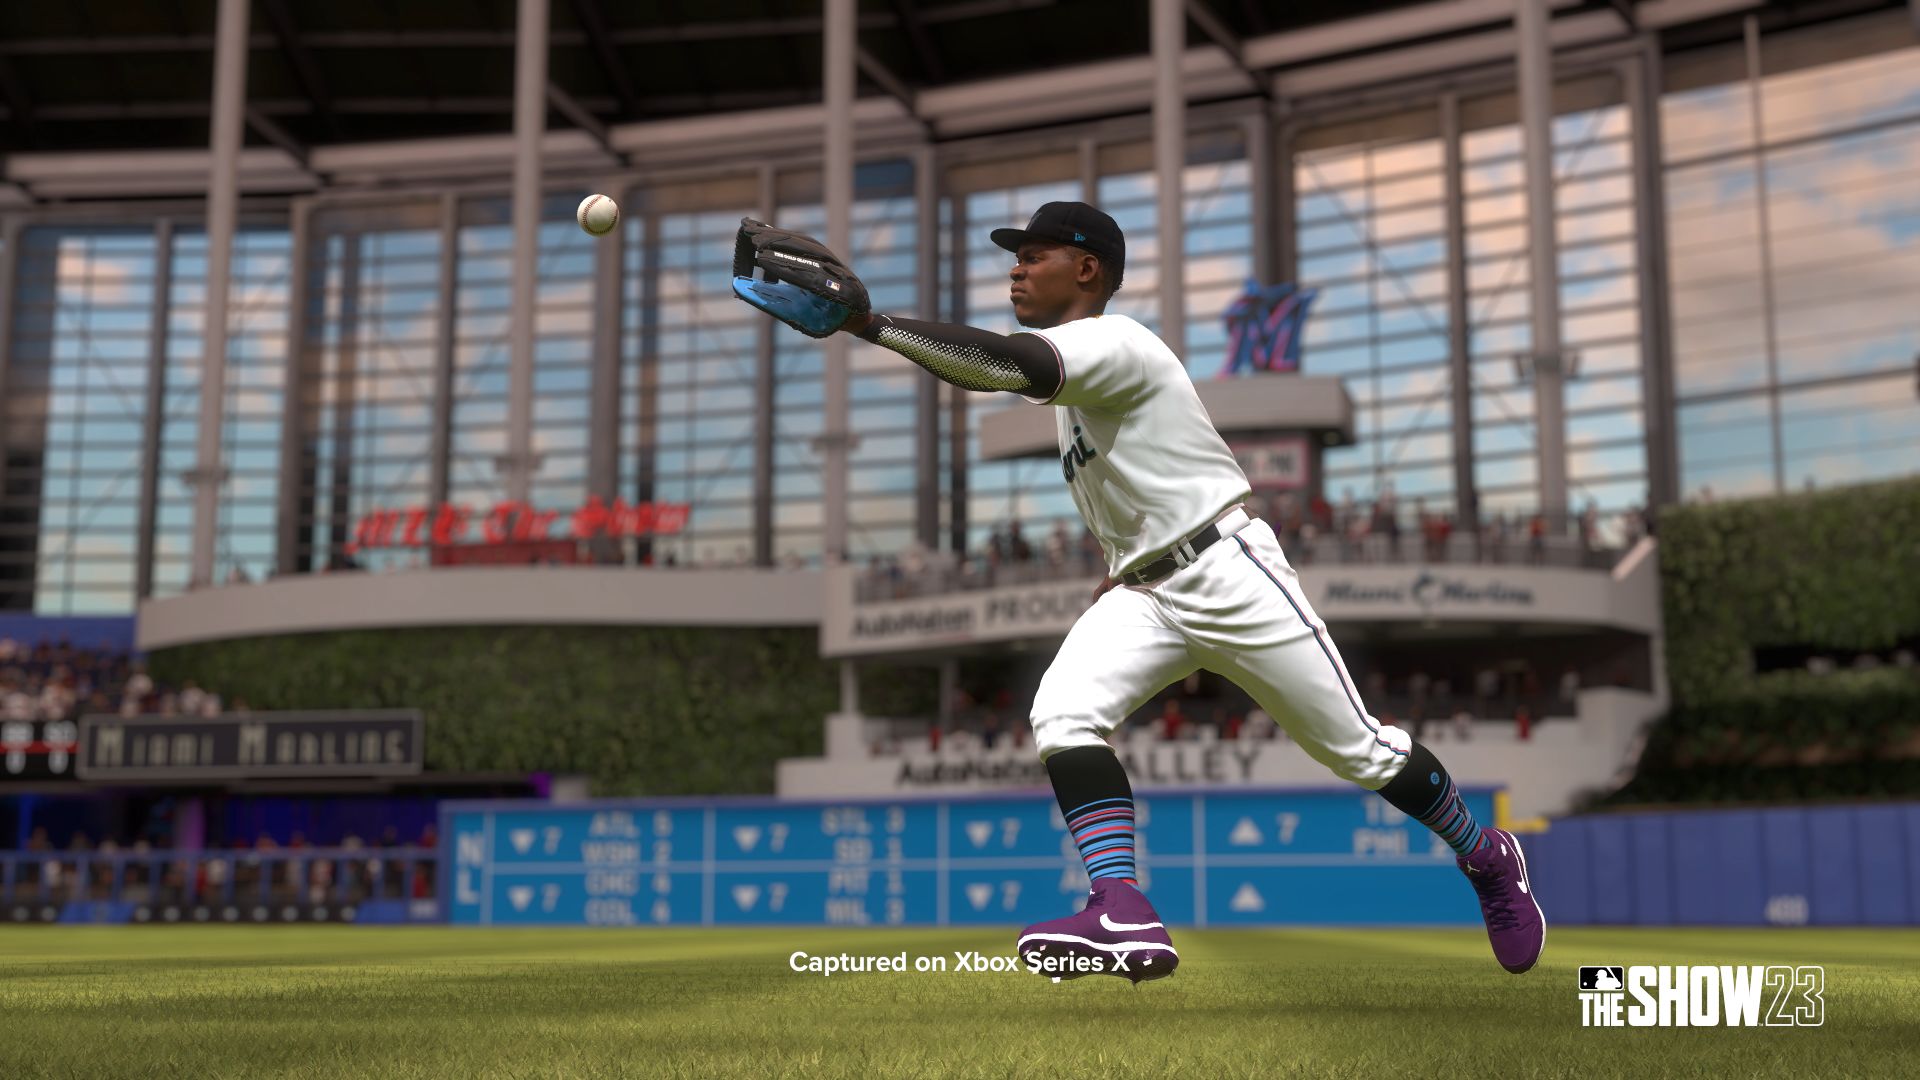 How MLB the Show rates players